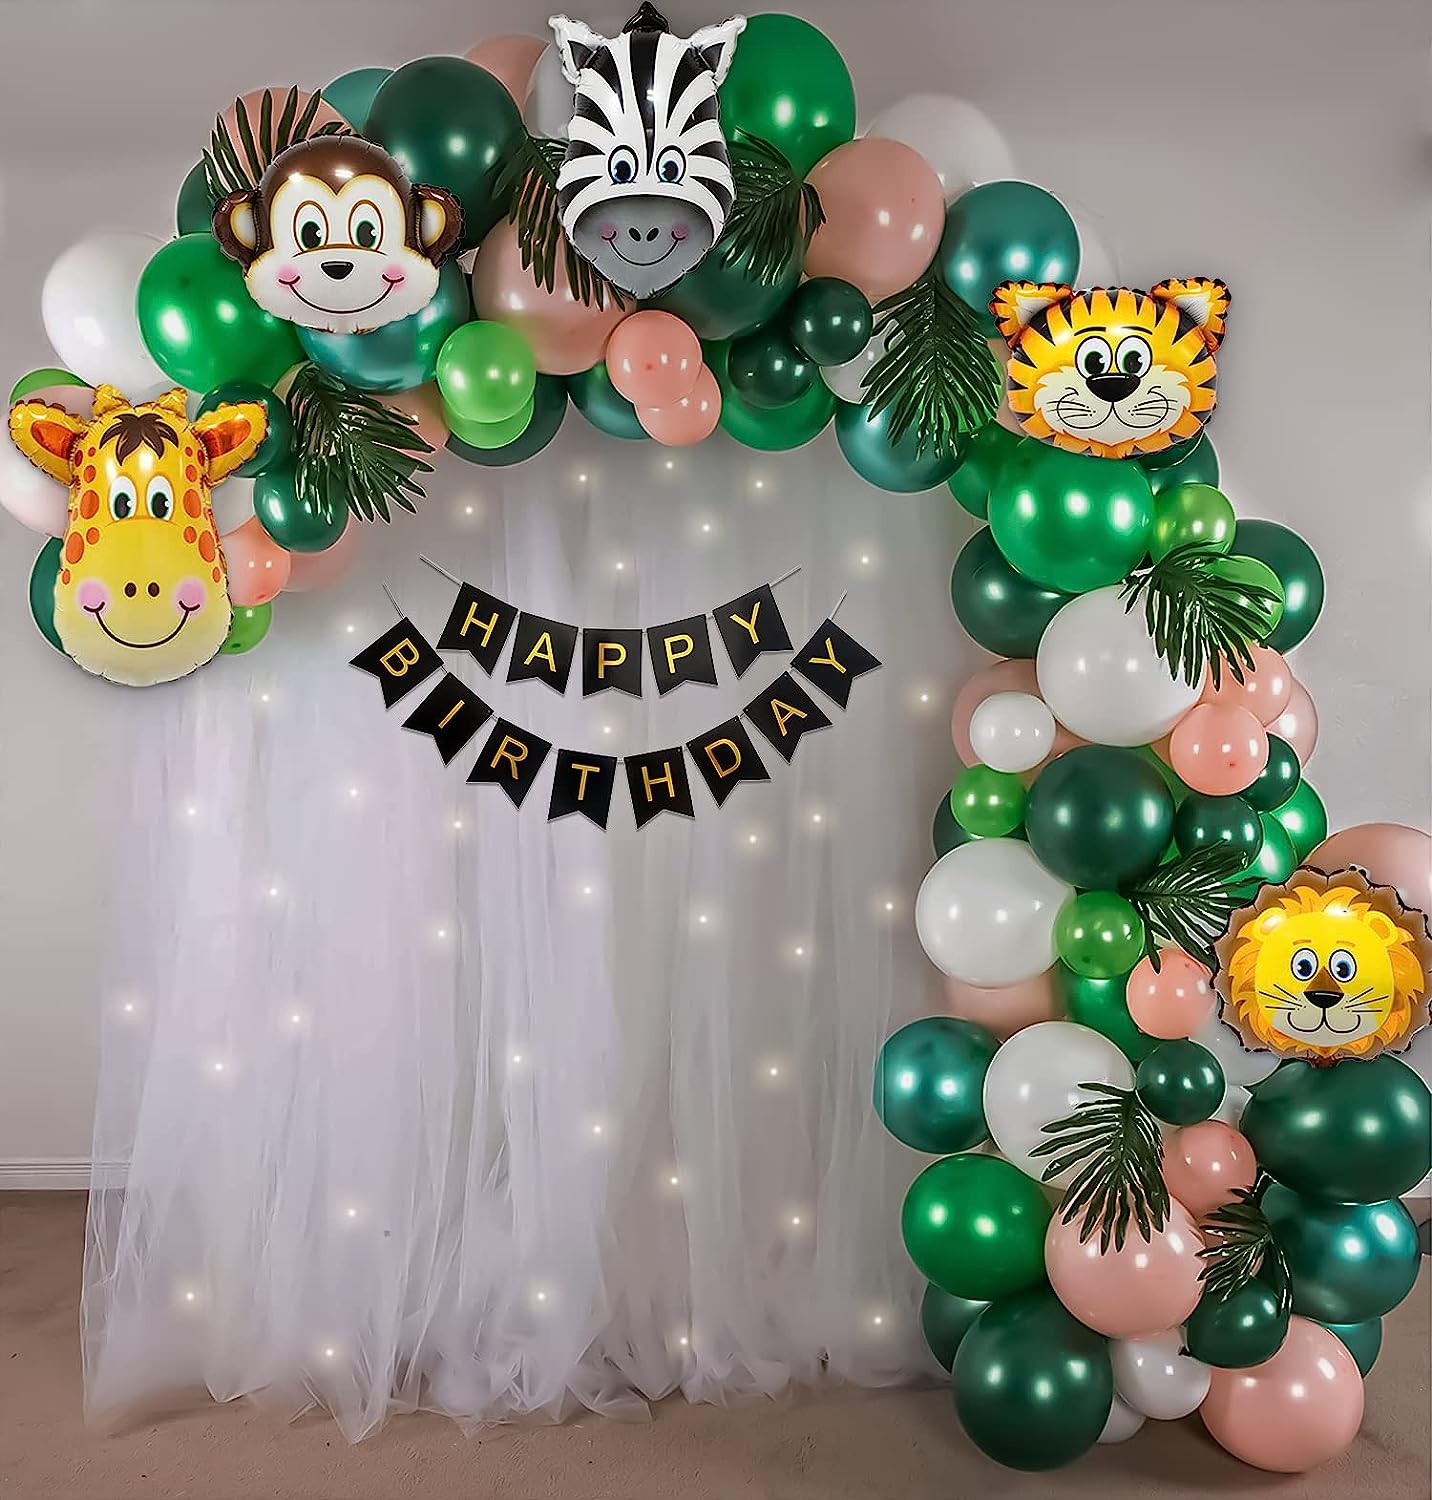 Jungle Theme DIY Birthday Decoration Items for Kids Party Décor with White Net Curtains and Fairy Lights Backdrop